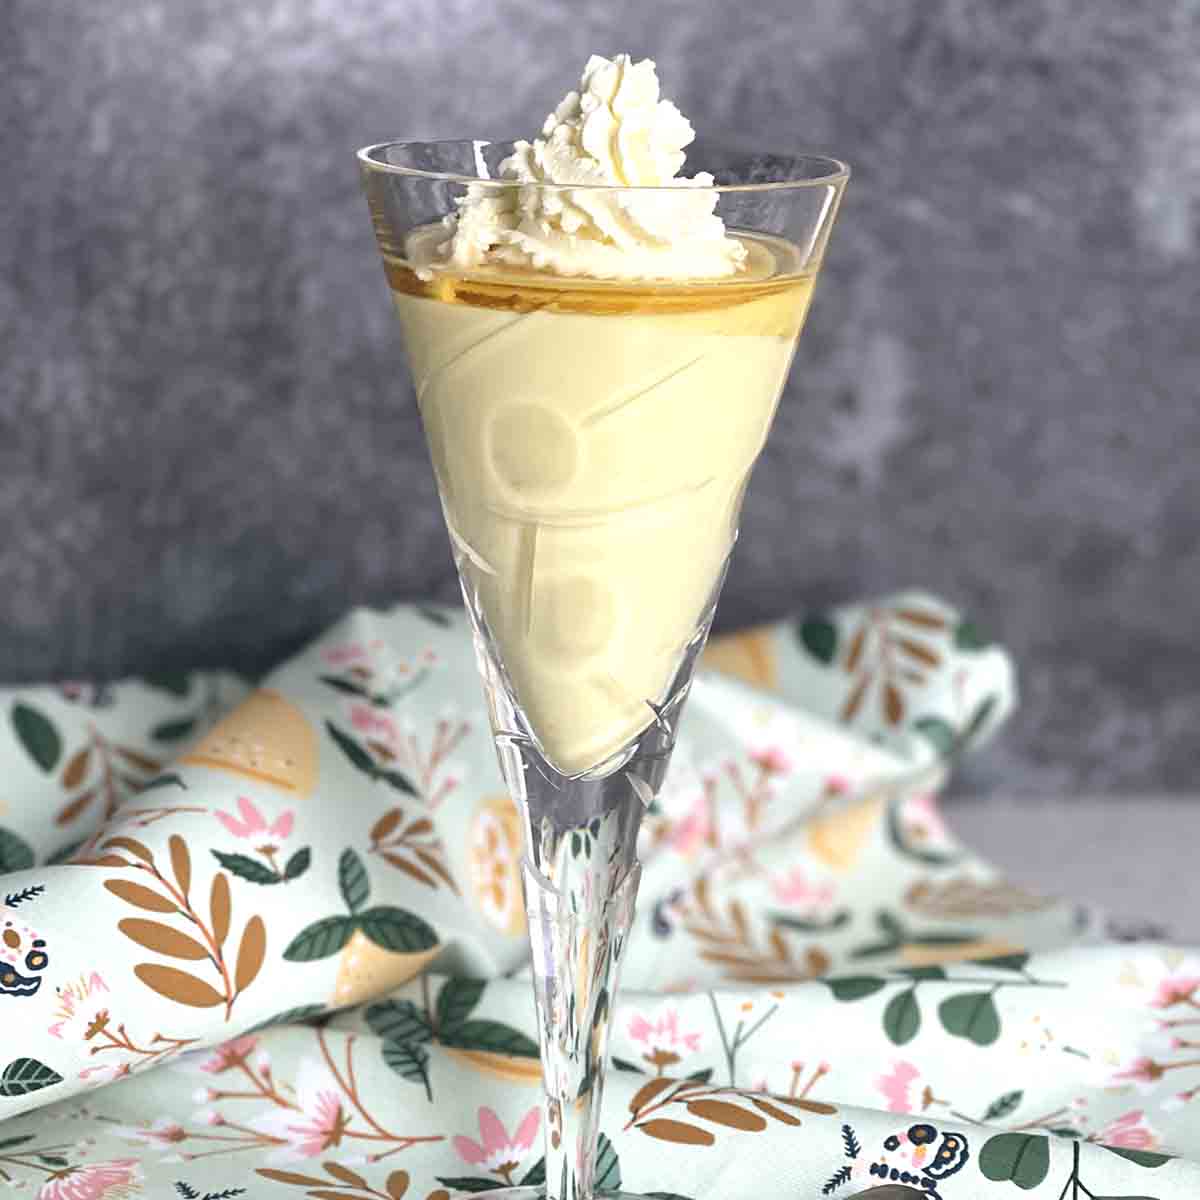 flummery dessert in a glass with cream on top.